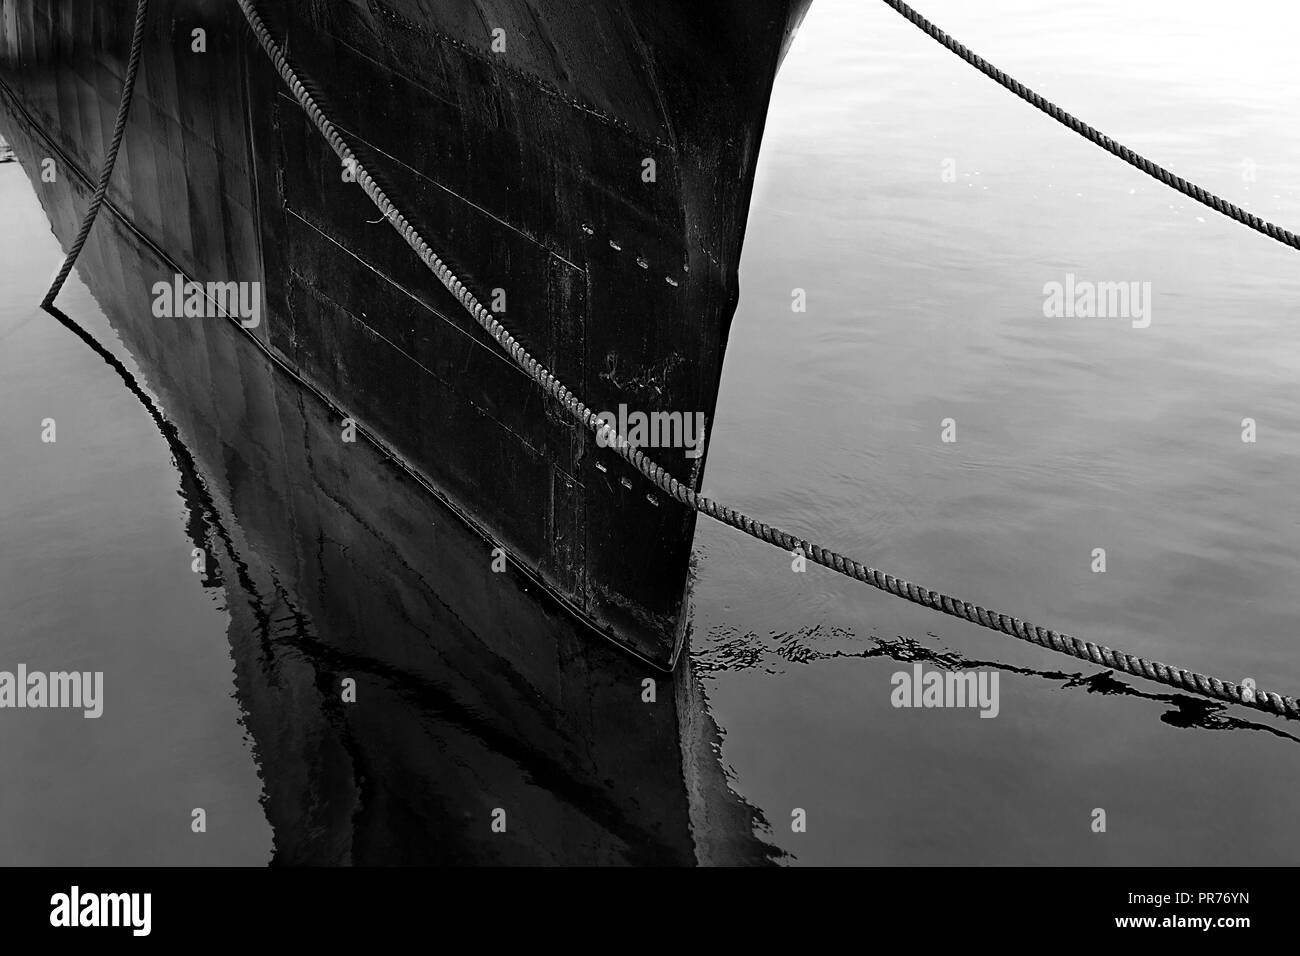 Very minimalistic picture in black and white showing a large submarine docked in the river Stock Photo